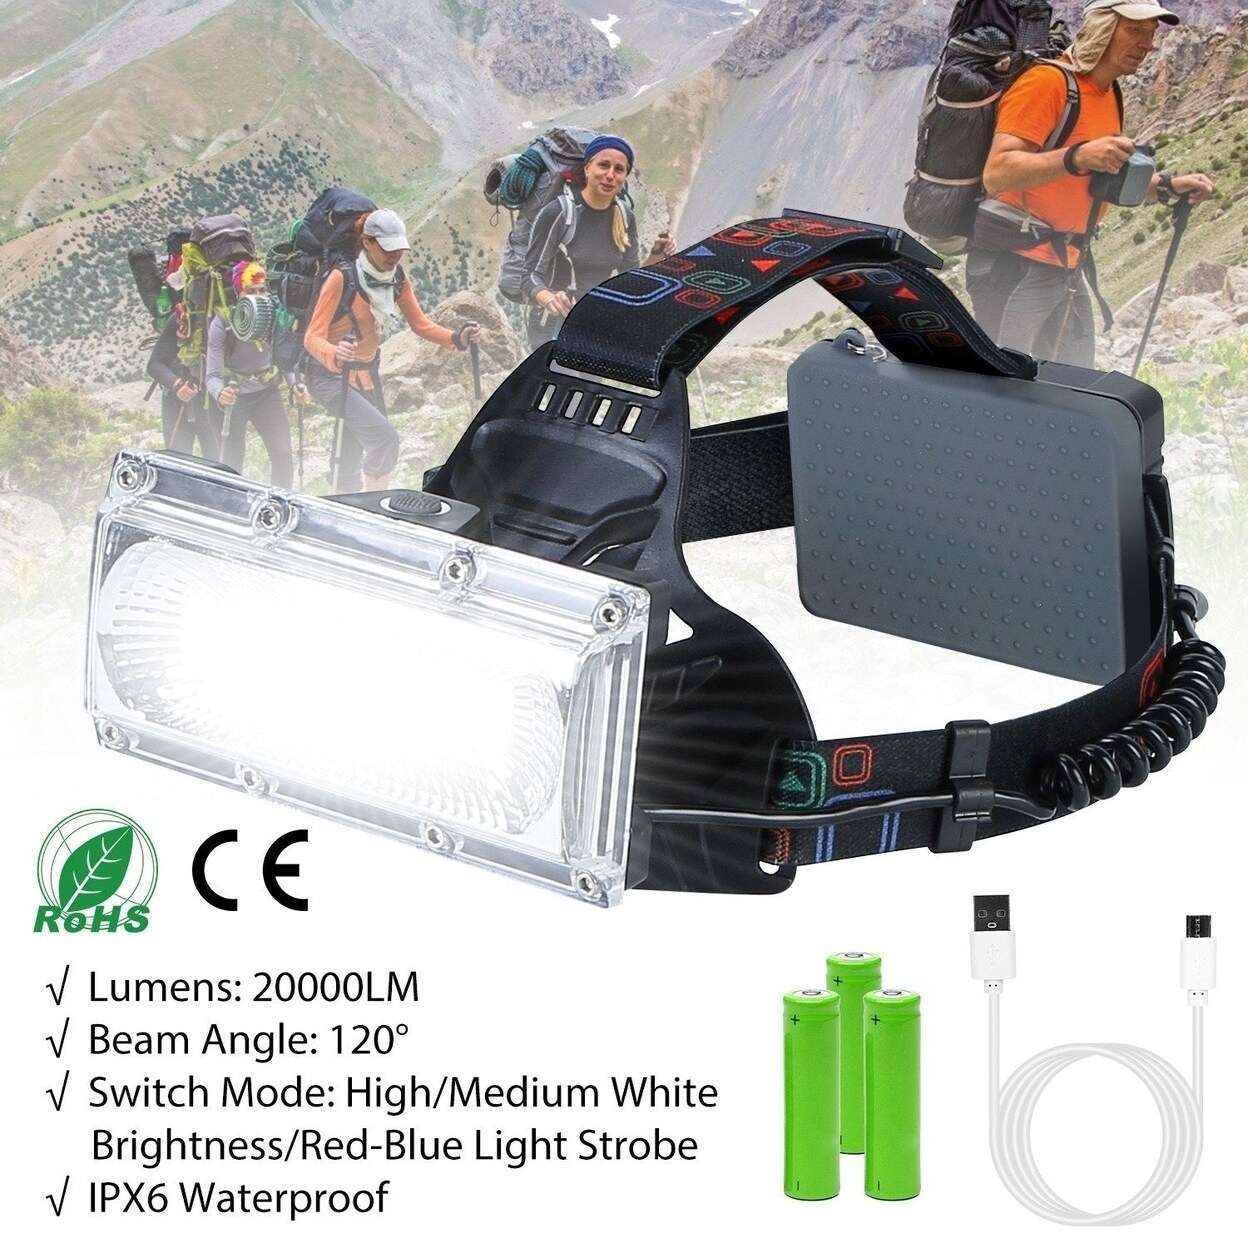 SKUSHOPS LED Work Headlamp 3 Lighting Modes Rechargeable Headlights IP65 Waterproof Rotatable Headlights For Cycling Hiking